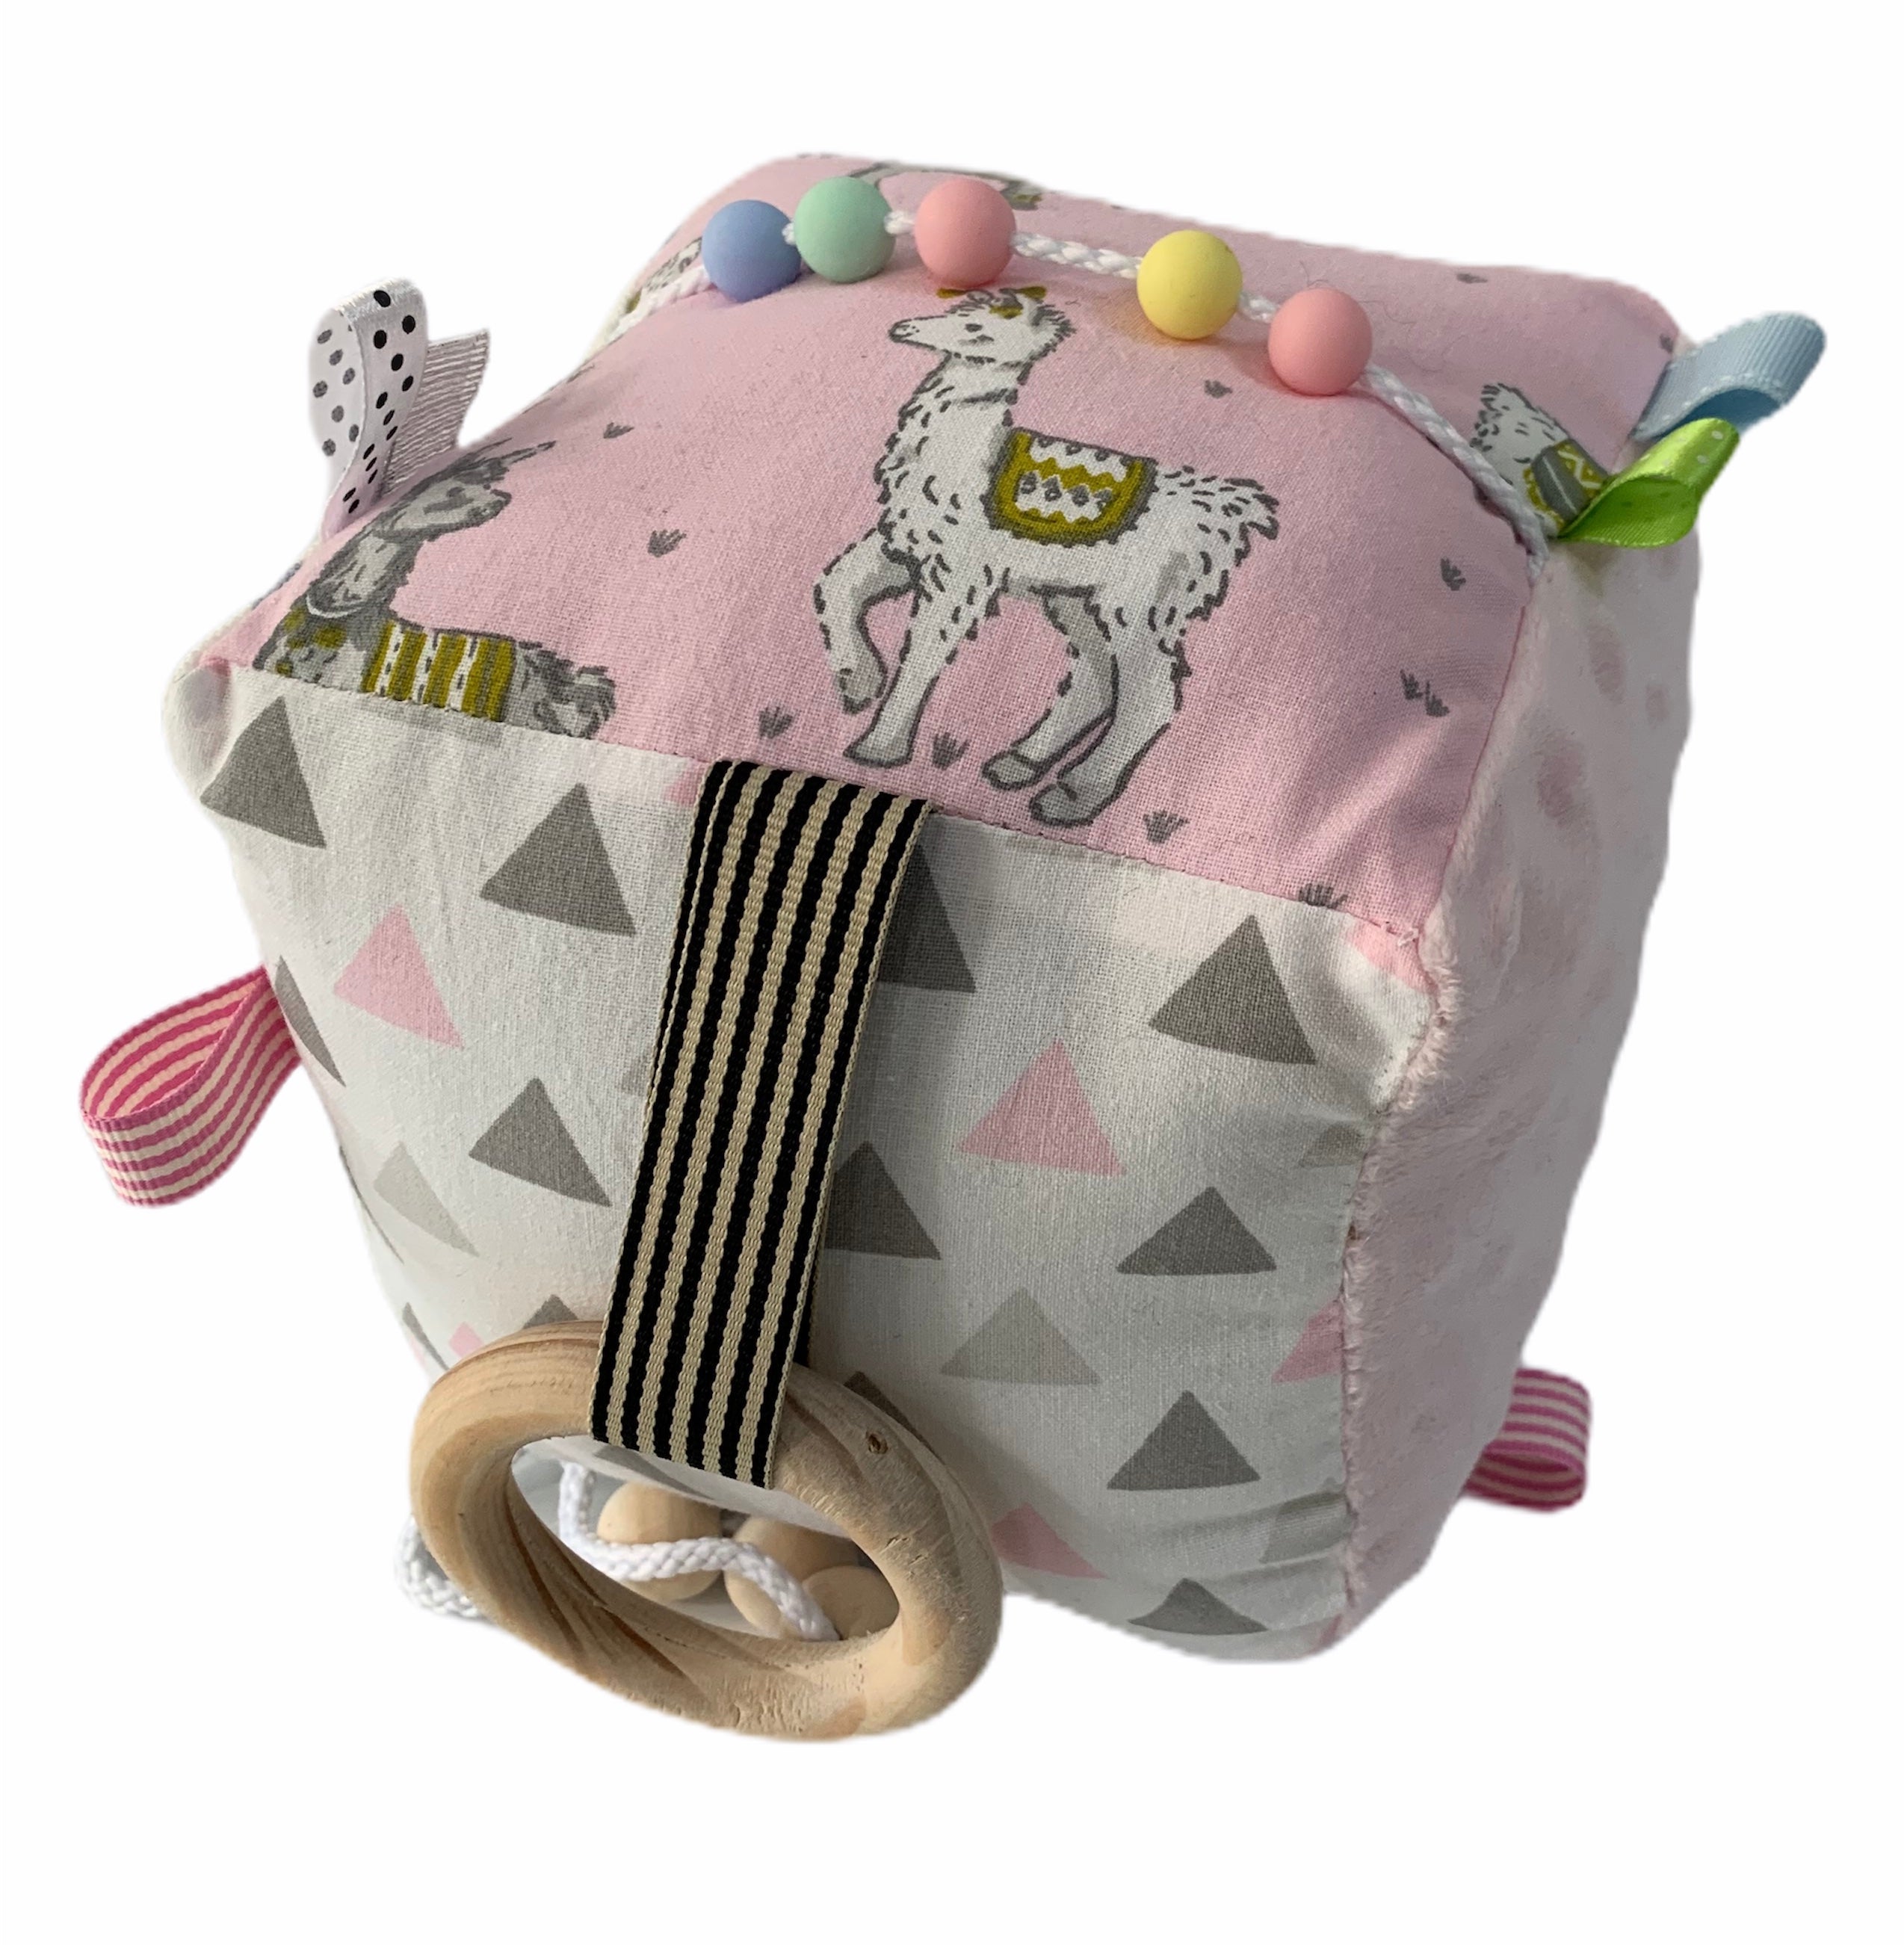 Baby Sensory Busy Cube – Squish_by_lauren